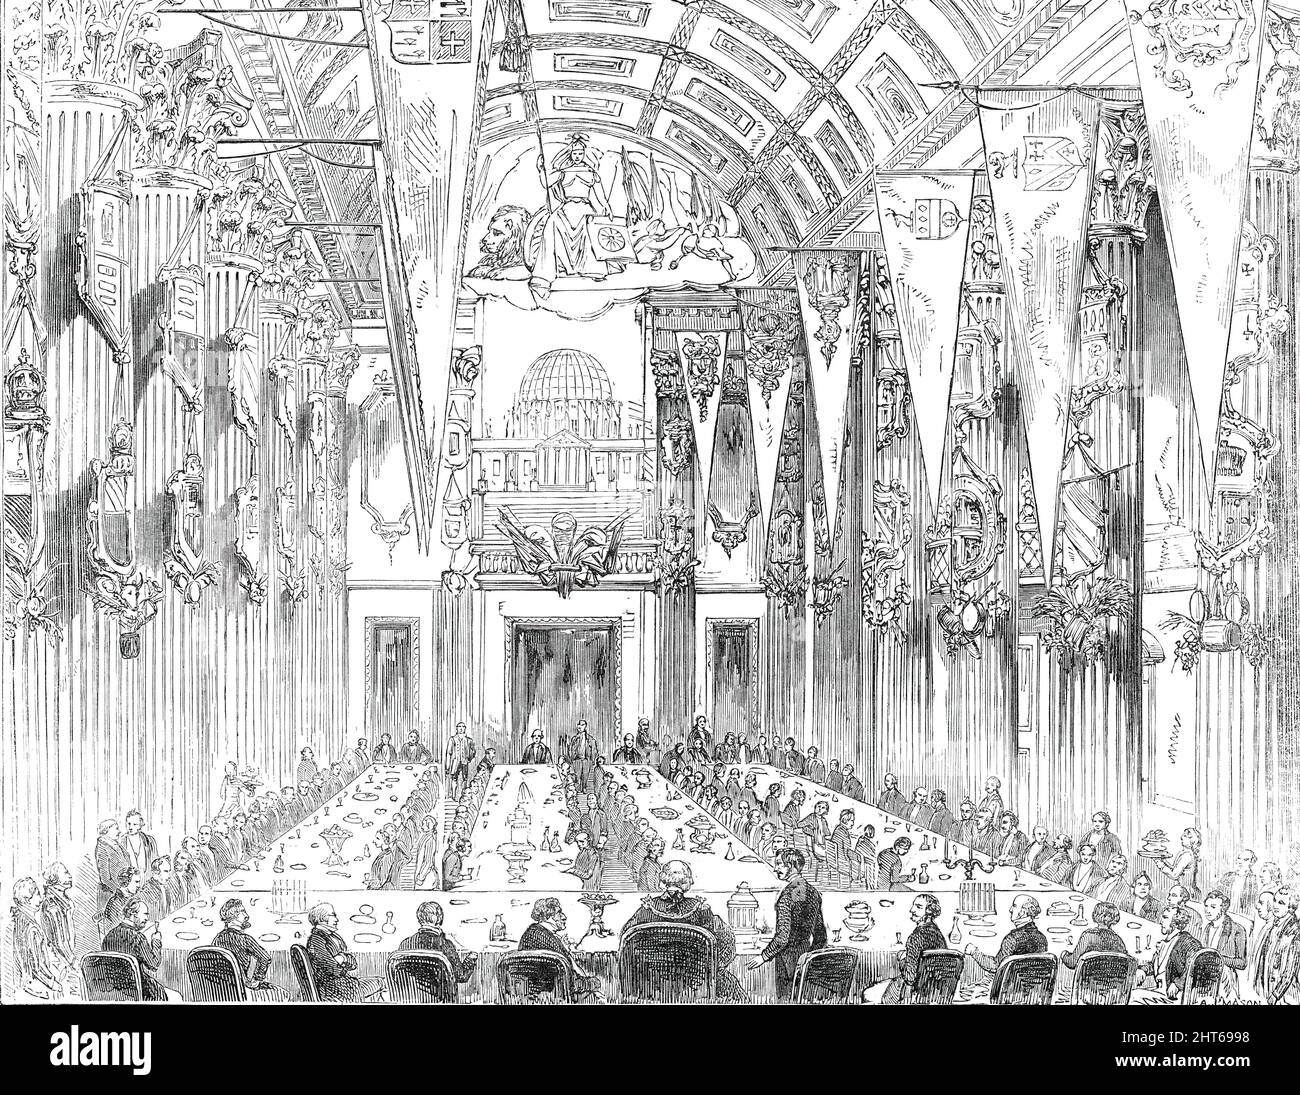 Banquet in the Egyptian Hall, at the Mansion-House, 1850. Dinner celebrating plans for the Great Exhibition of 1851: 'the Prince Consort taking the seat of honour on the right of the Lord Mayor...the hall presented an extremely brilliant and gay aspect. The tables were loaded with a profusion of plate, costly vases, fruit, and rare exotics, many beautiful emblematical devices of art, trade, and manufactures being interspersed with more substantial viands. The pillars surrounding the hall were hung with banners bearing the arms of the several counties of England, Scotland, and Wales, and at eit Stock Photo